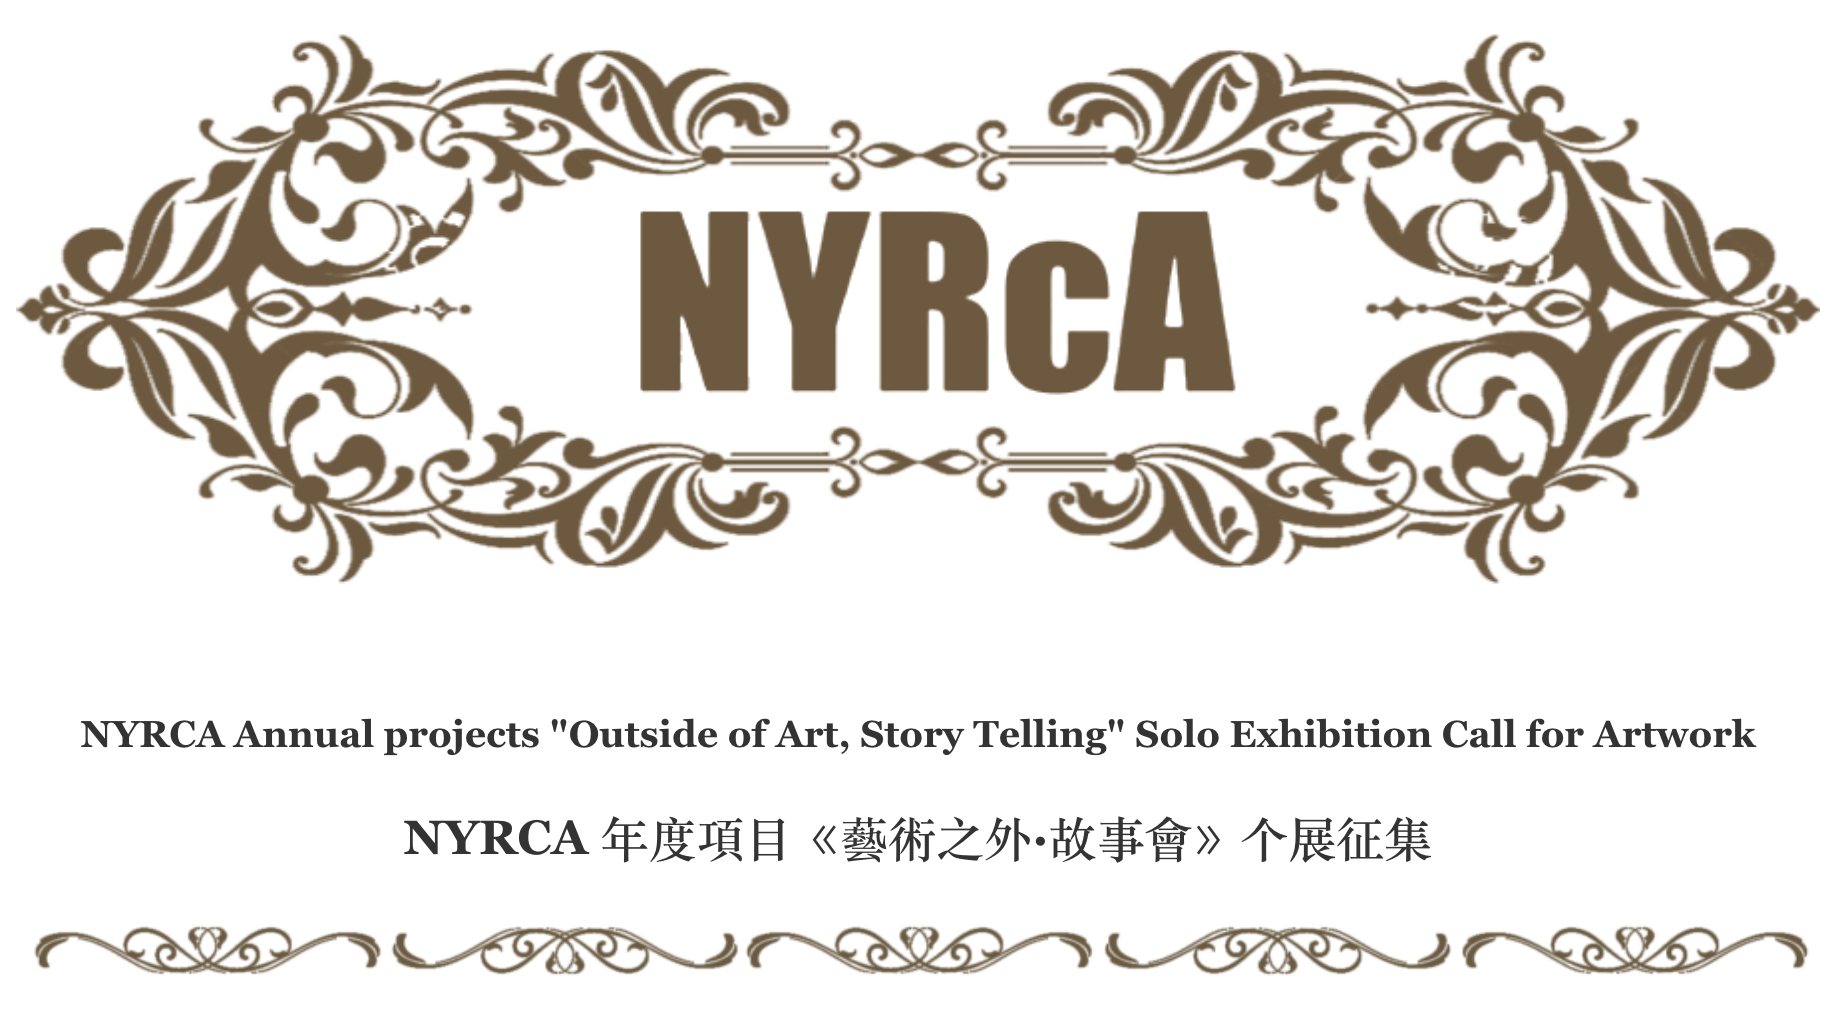 NYRCA Annual projects “Outside of Art, Story Telling” Solo Exhibition Call for Artwork